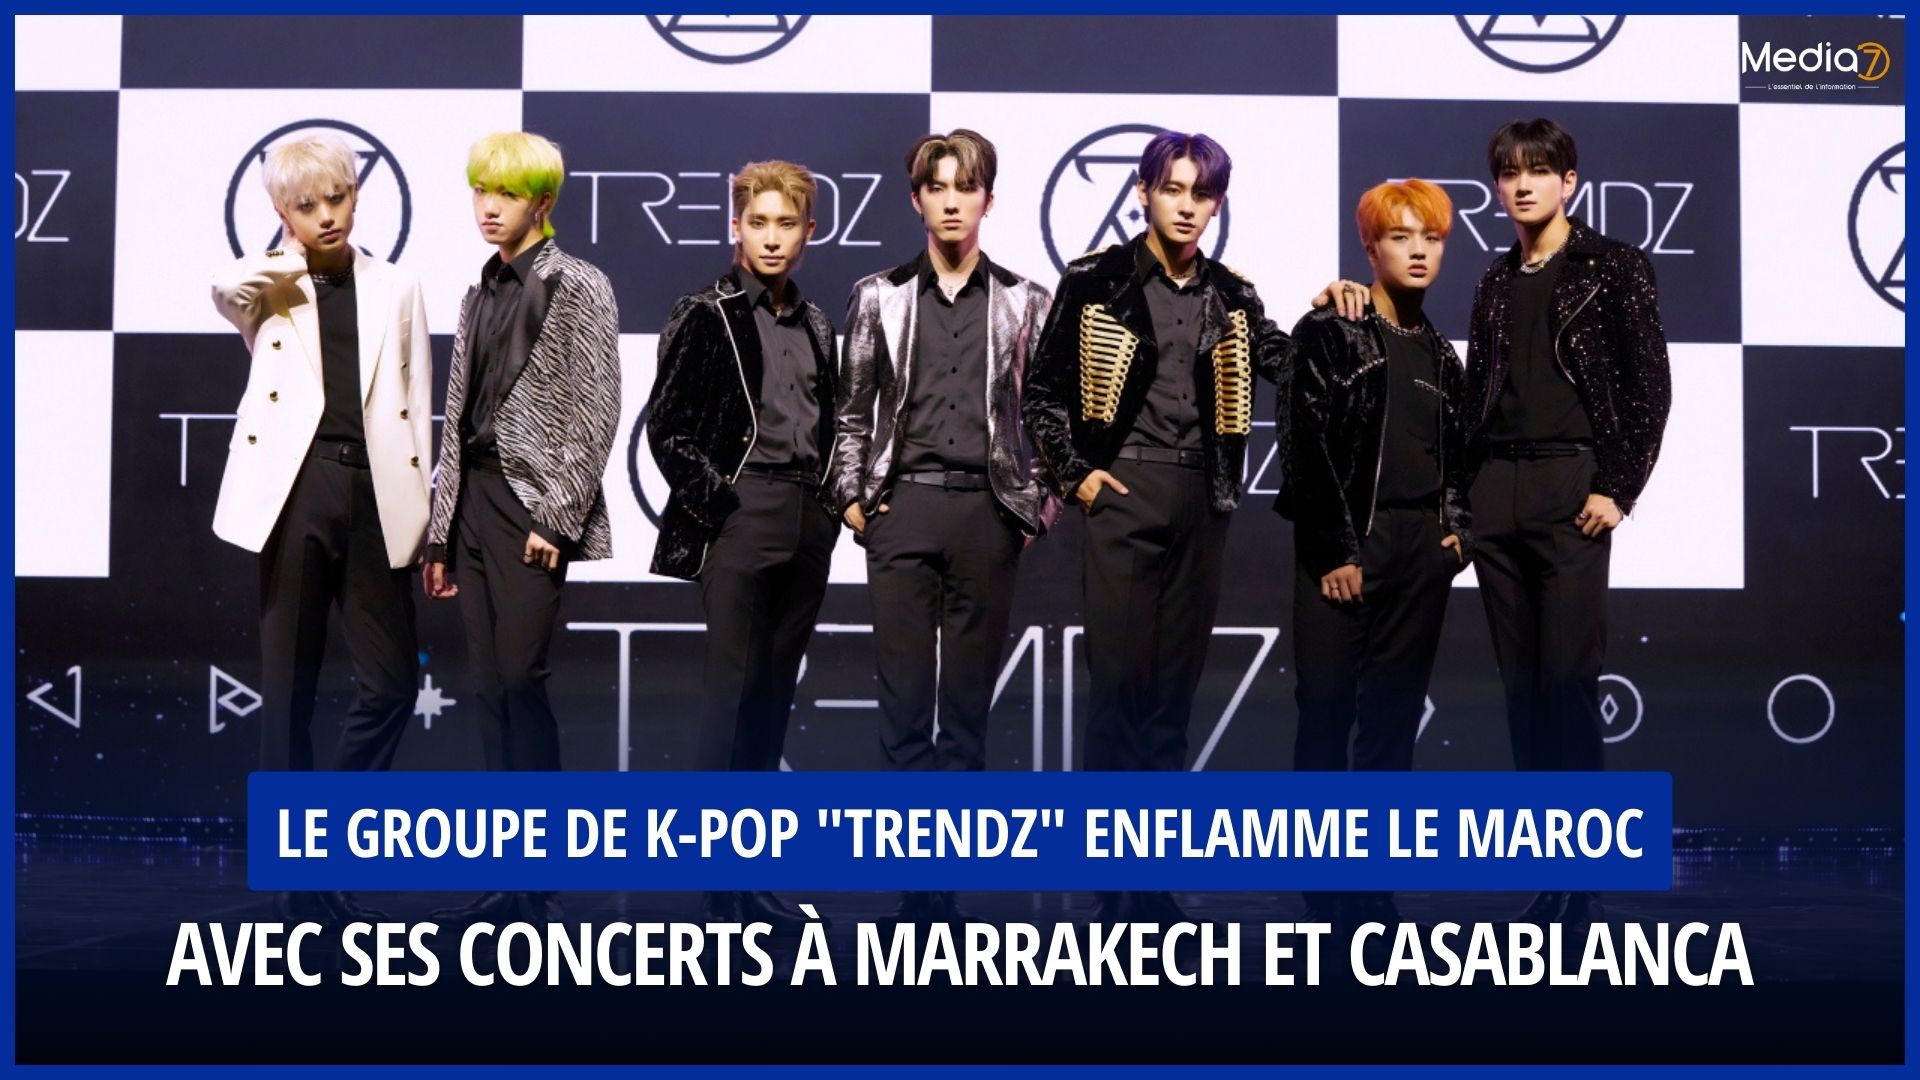 The K-POP Group “Trendz” ignites Morocco with its Concerts in Marrakech and Casablanca